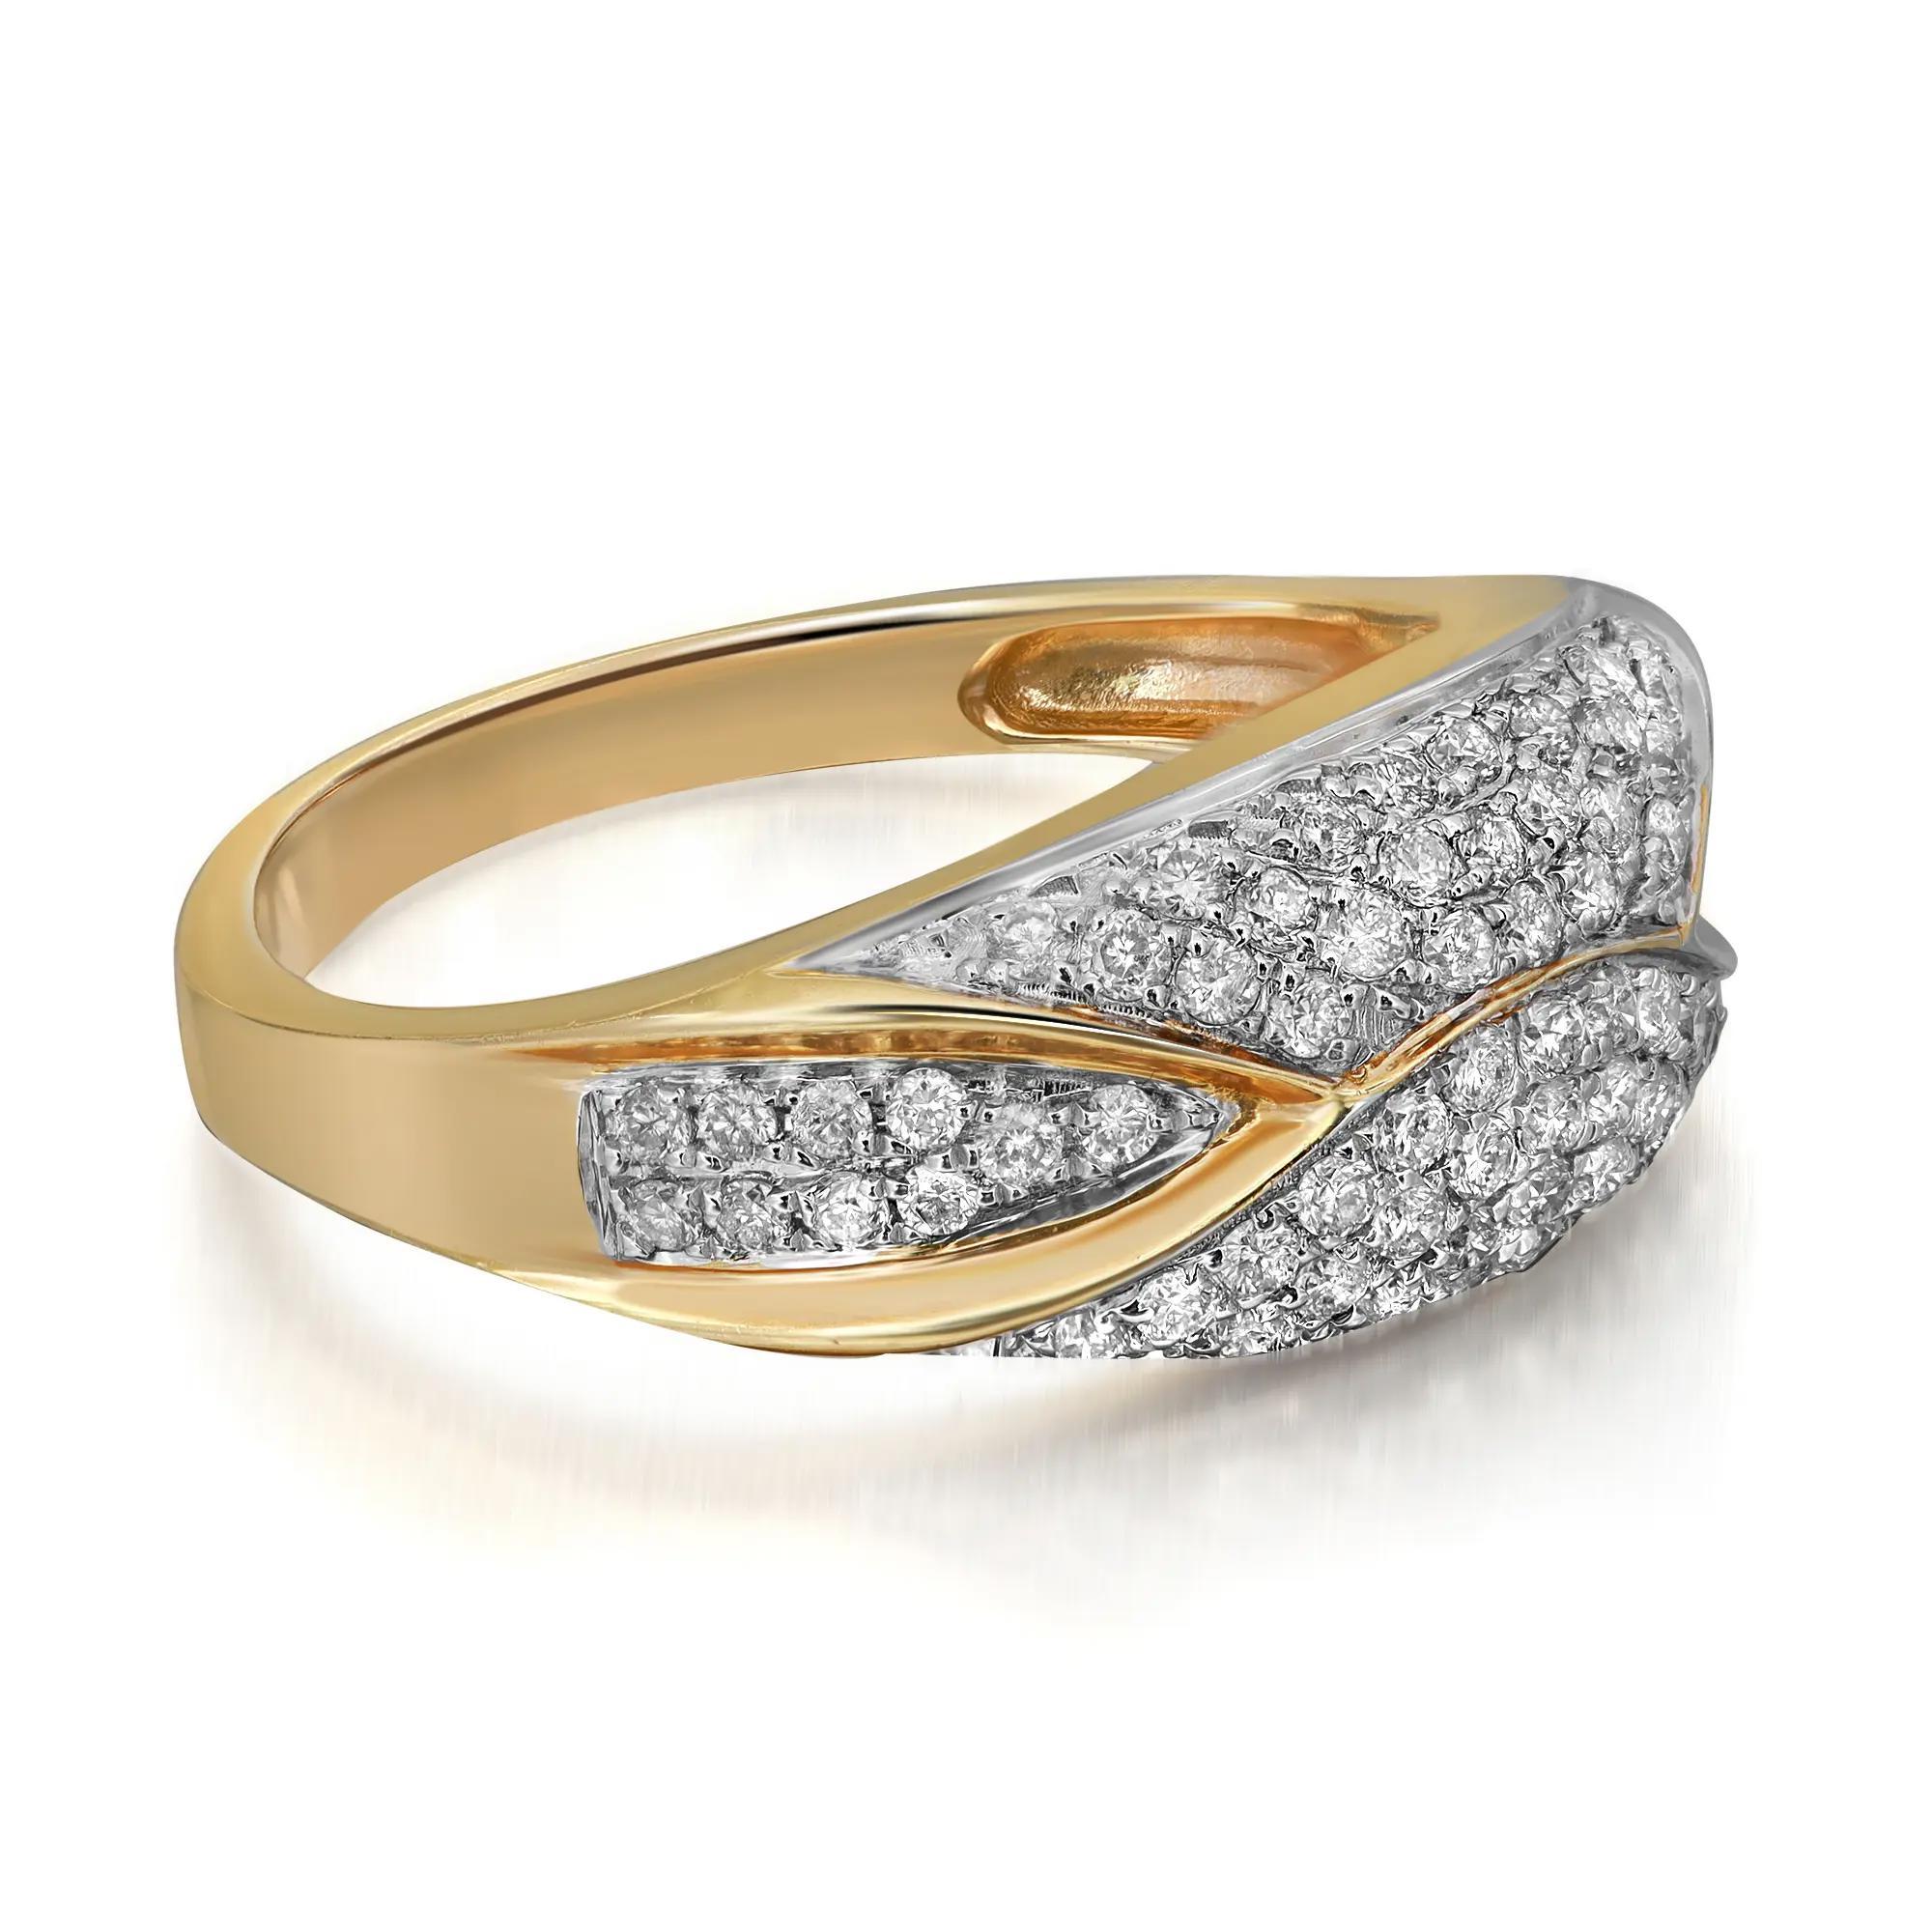 Classic and elegant diamond band ring rendered in highly polished 14K yellow gold. This ring features sparkling round brilliant cut diamonds in prong settings totaling 0.60 carat. Diamond quality: I color and SI1 clarity. Ring size: 7.5. Ring width: